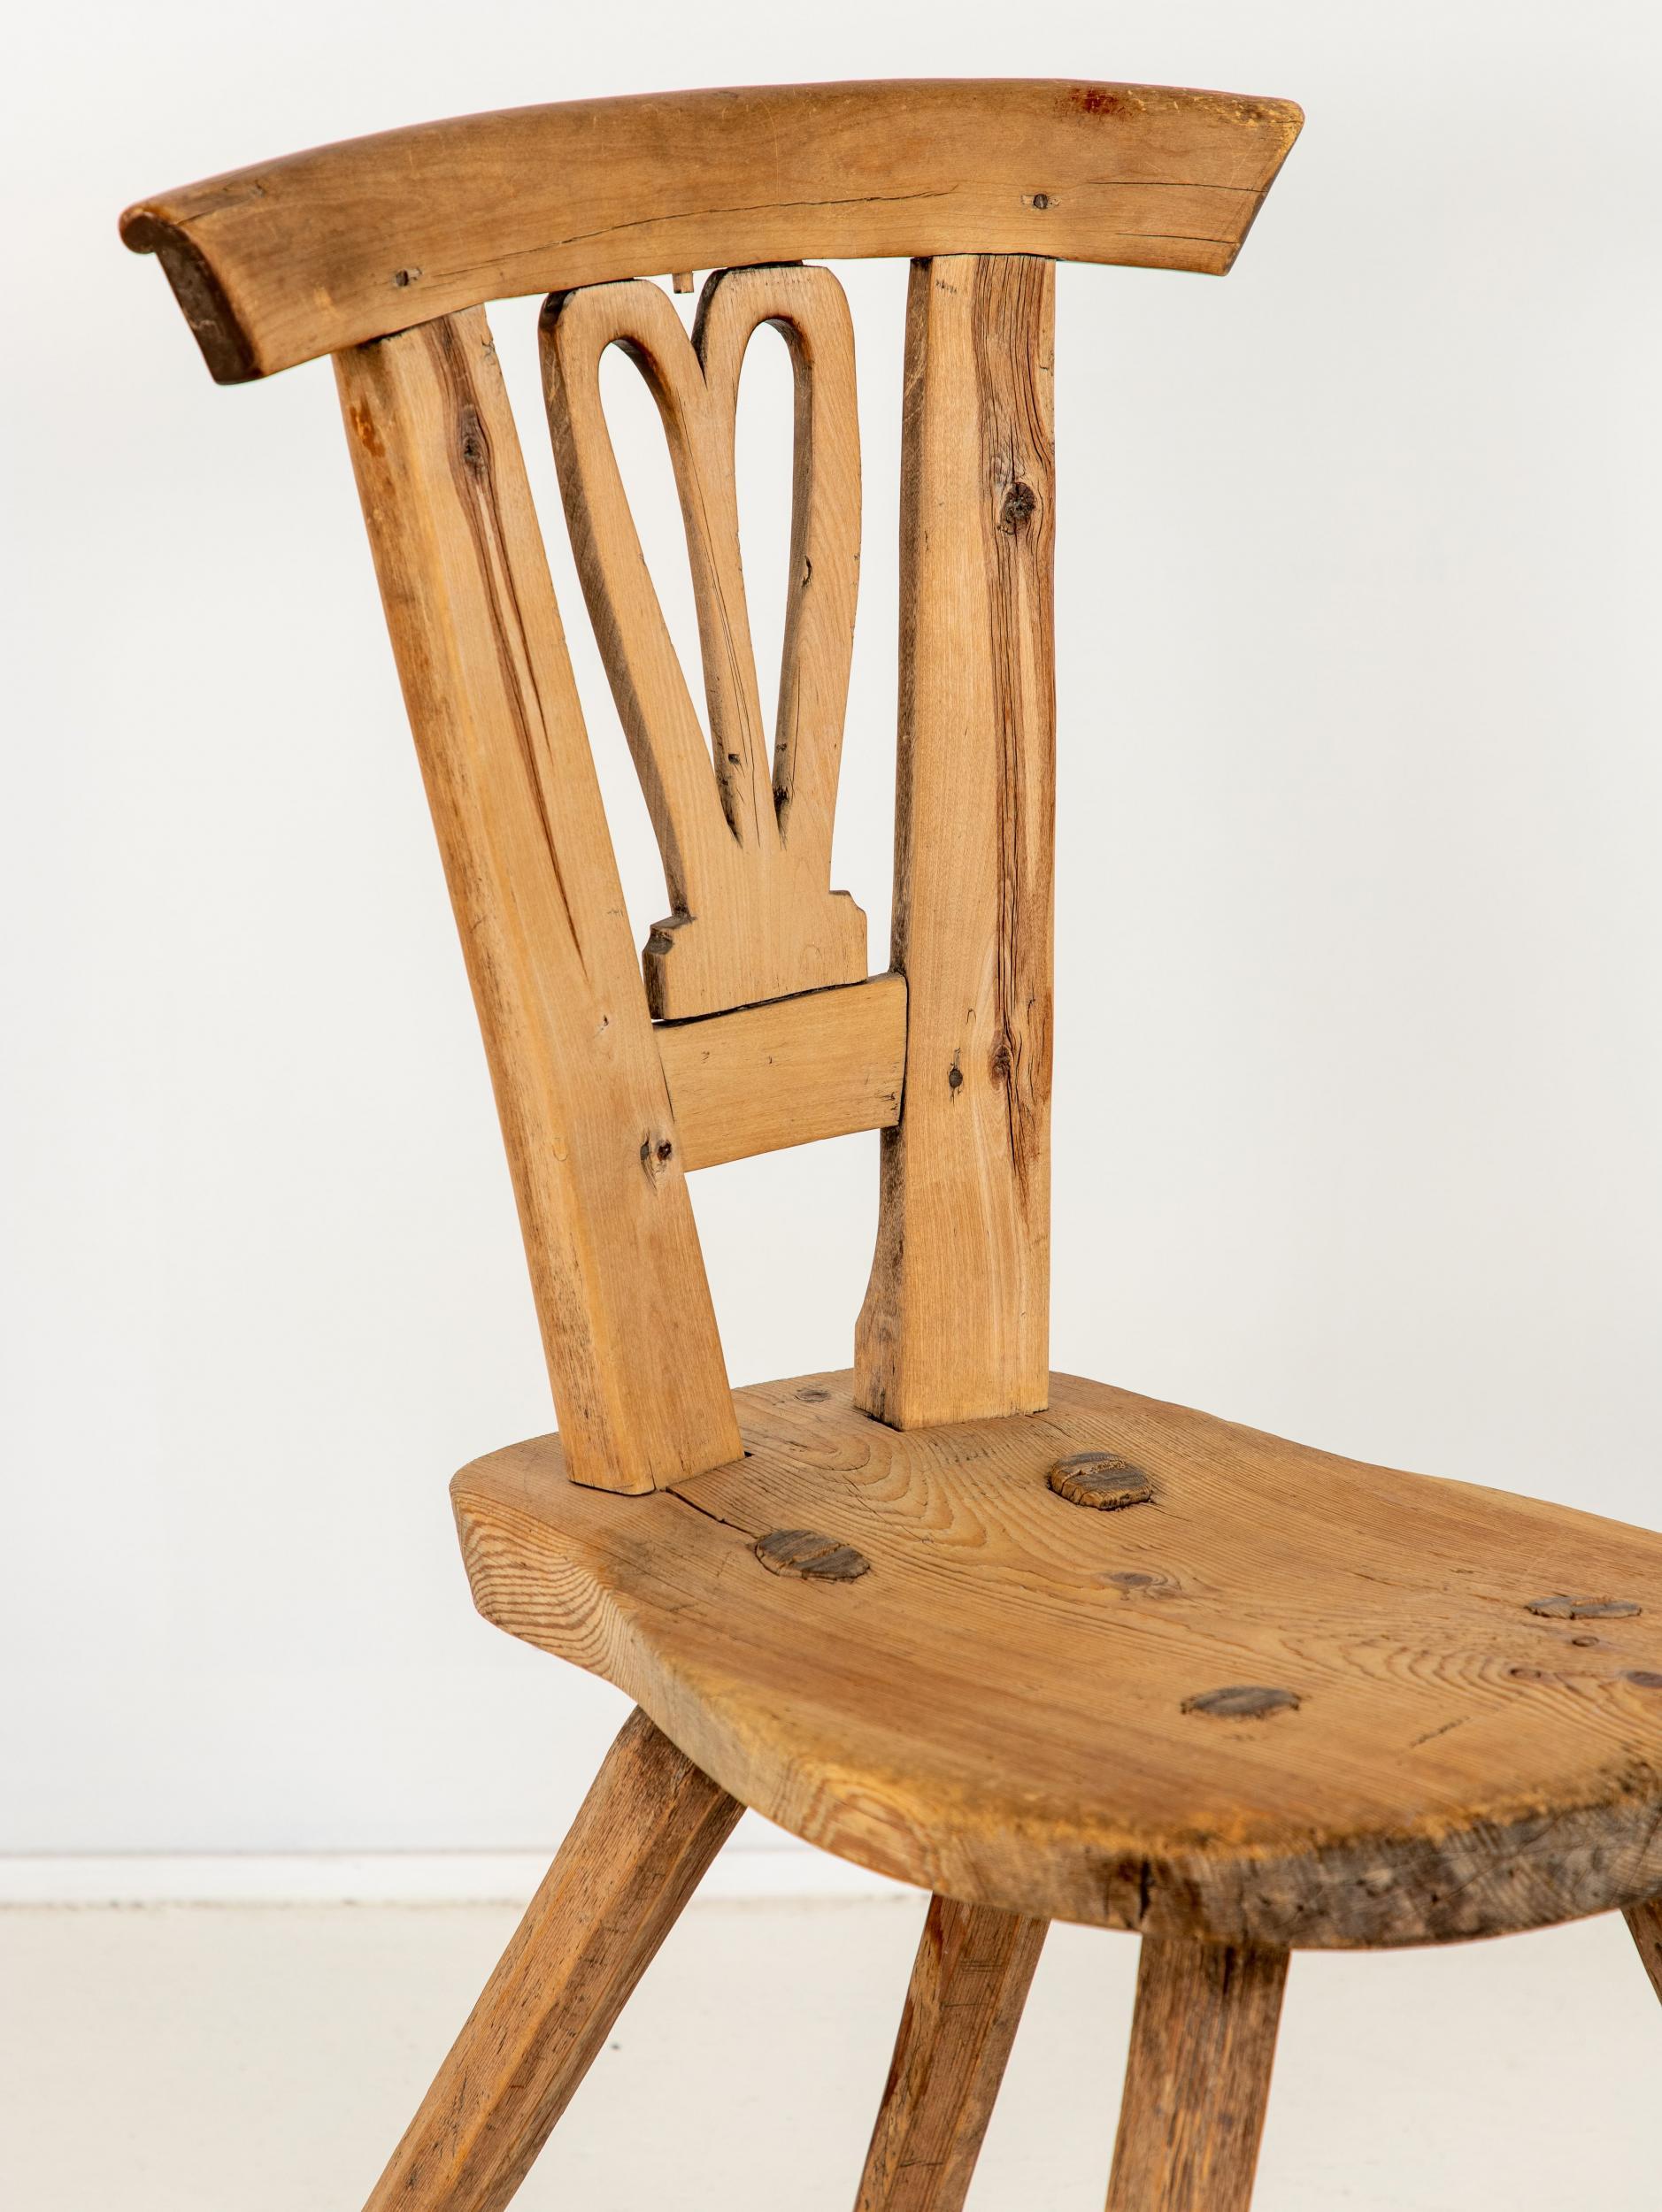 Small oak chair in the English Arts & Crafts style with four splayed legs.